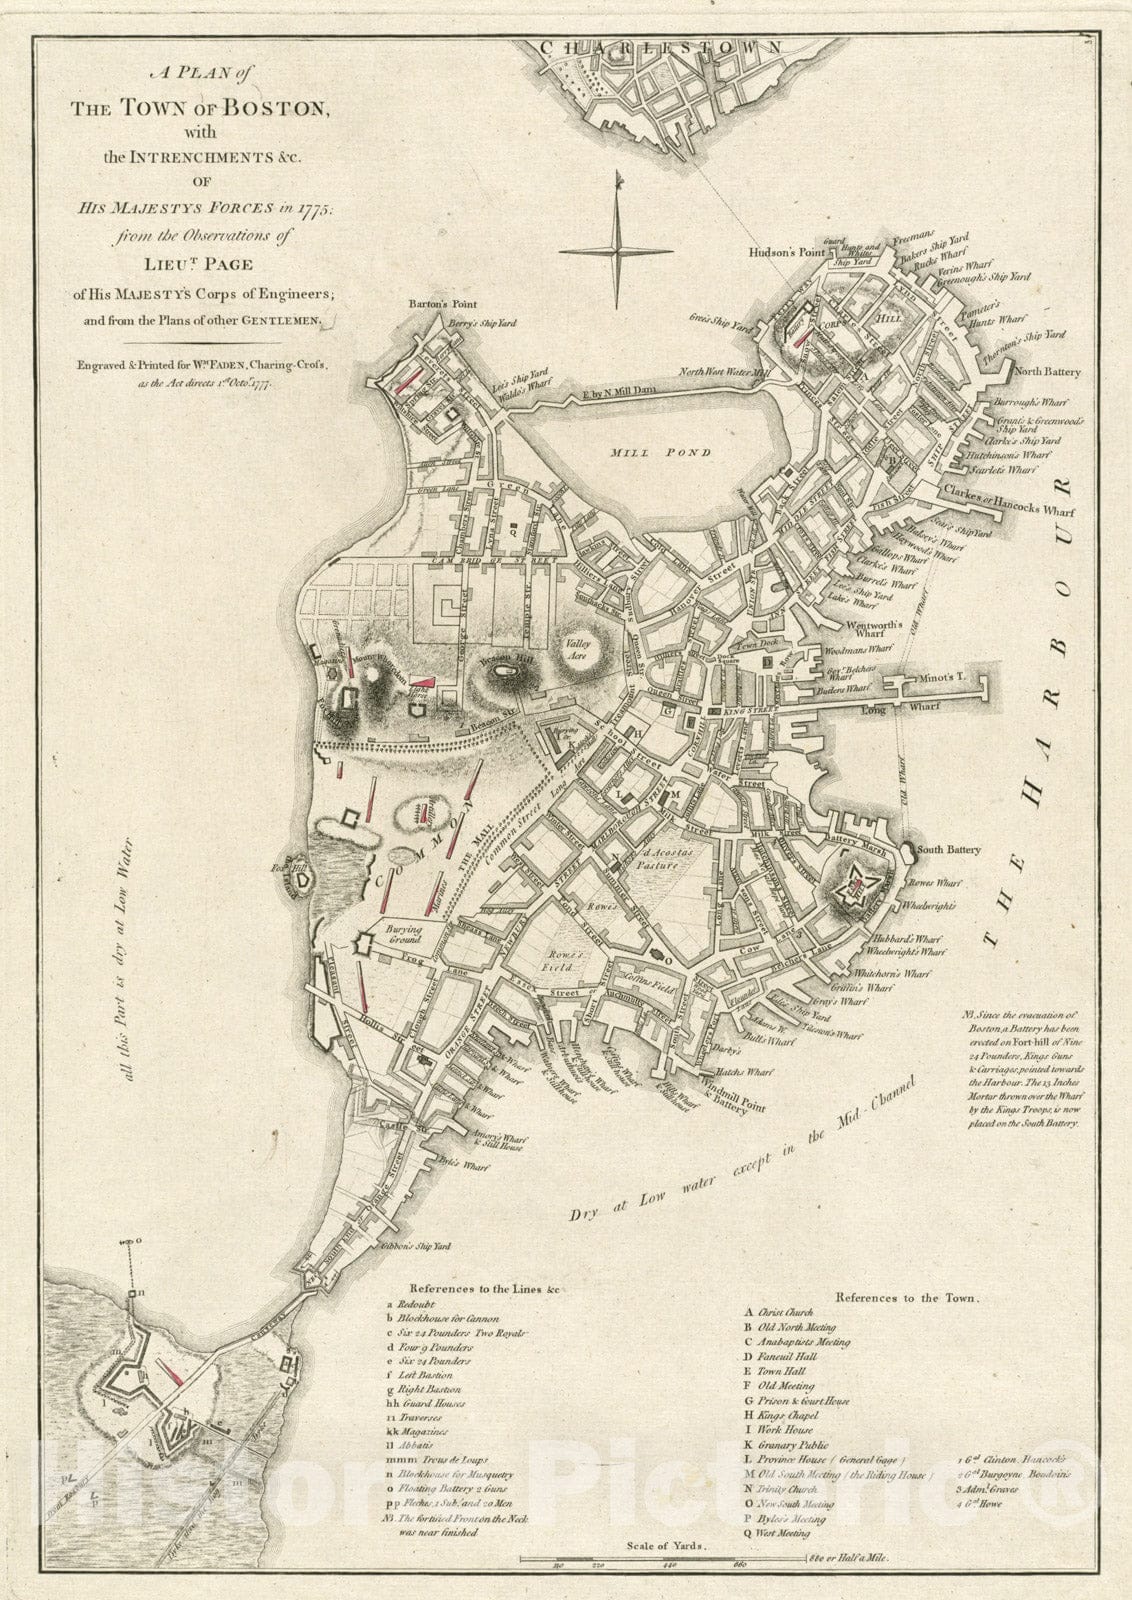 Historical Map, A Plan of The Town of Boston, with The intrenchments et Cetera. of His Majestys Forces in 1775 : from The observations of Lieut. Page of His Majesty's, Vintage Wall Art